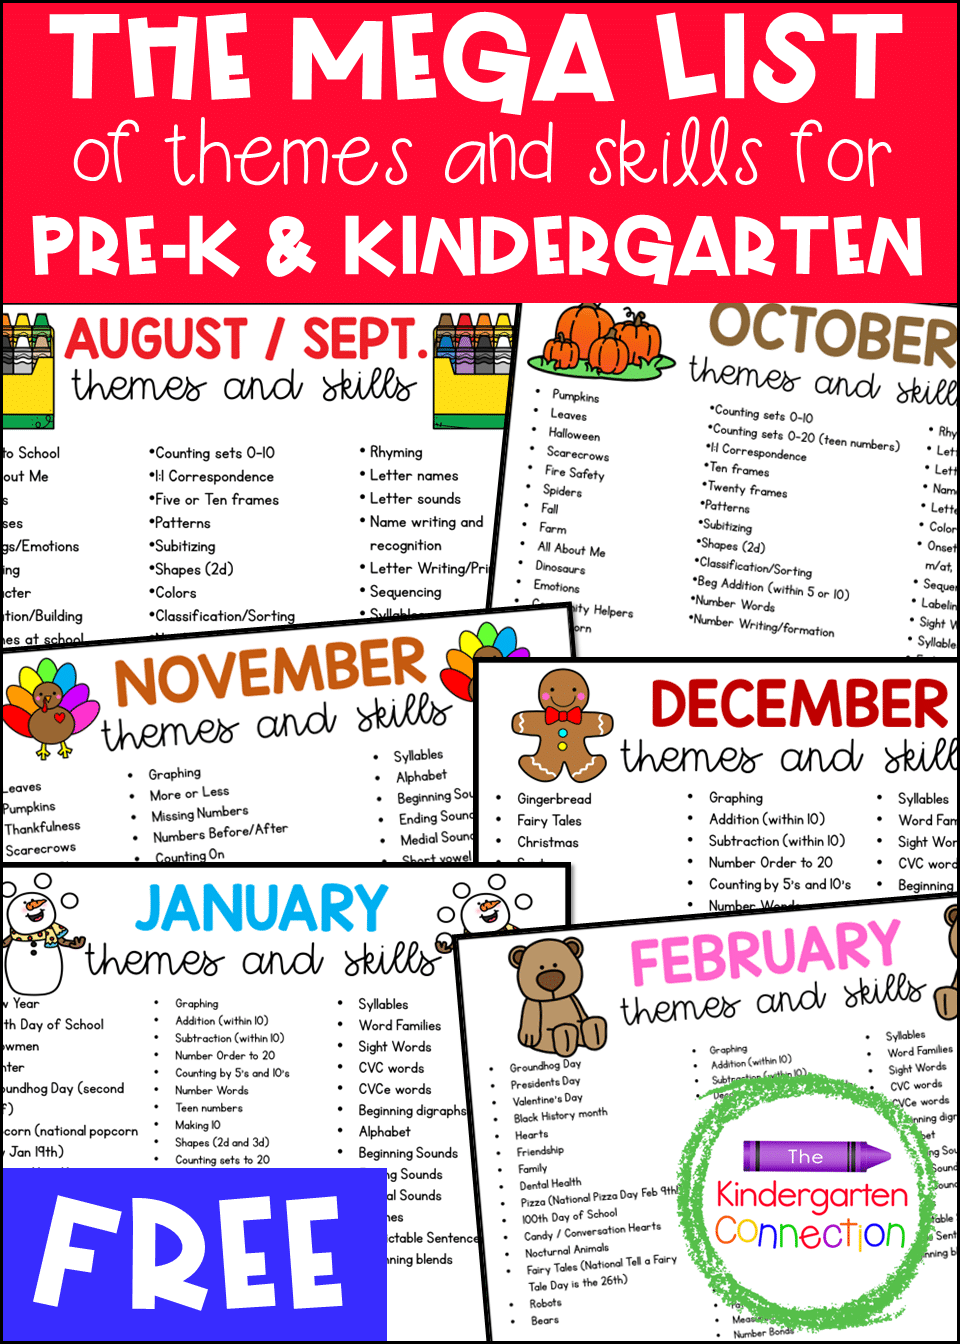 Grab our free, clickable Mega List of Themes and Skills for Pre-K & Kindergarten Lesson Plans to see what themes/skills I cover in my classroom all year!